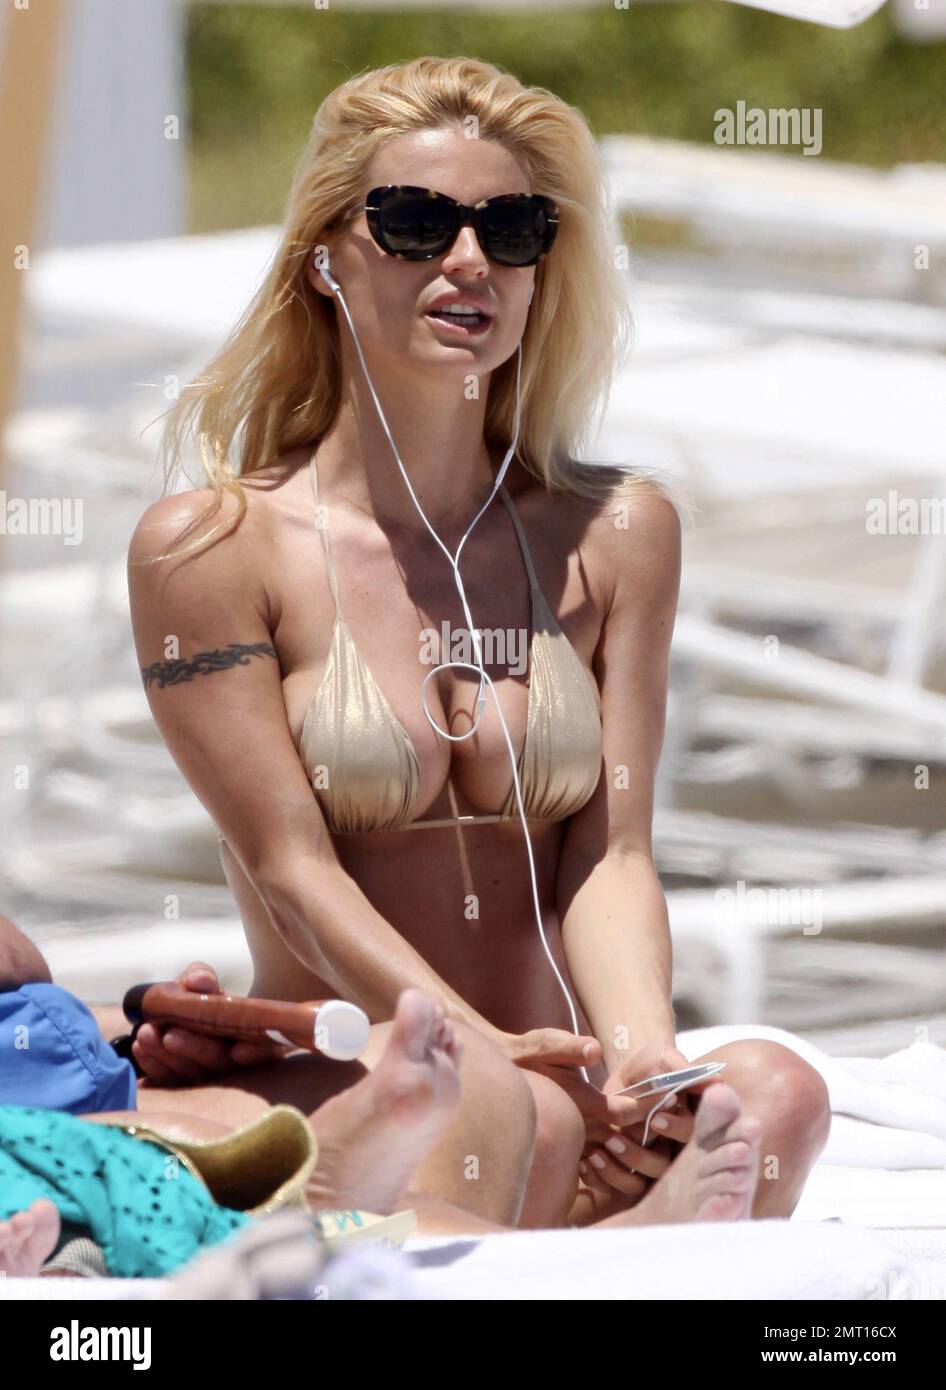 Michelle Hunziker spends the day at the beach with her daughter Aurora  Sophie and bodyguard Federico. The 35 year old Swiss TV hostess, actress,  model and singer showed off her amazing figure